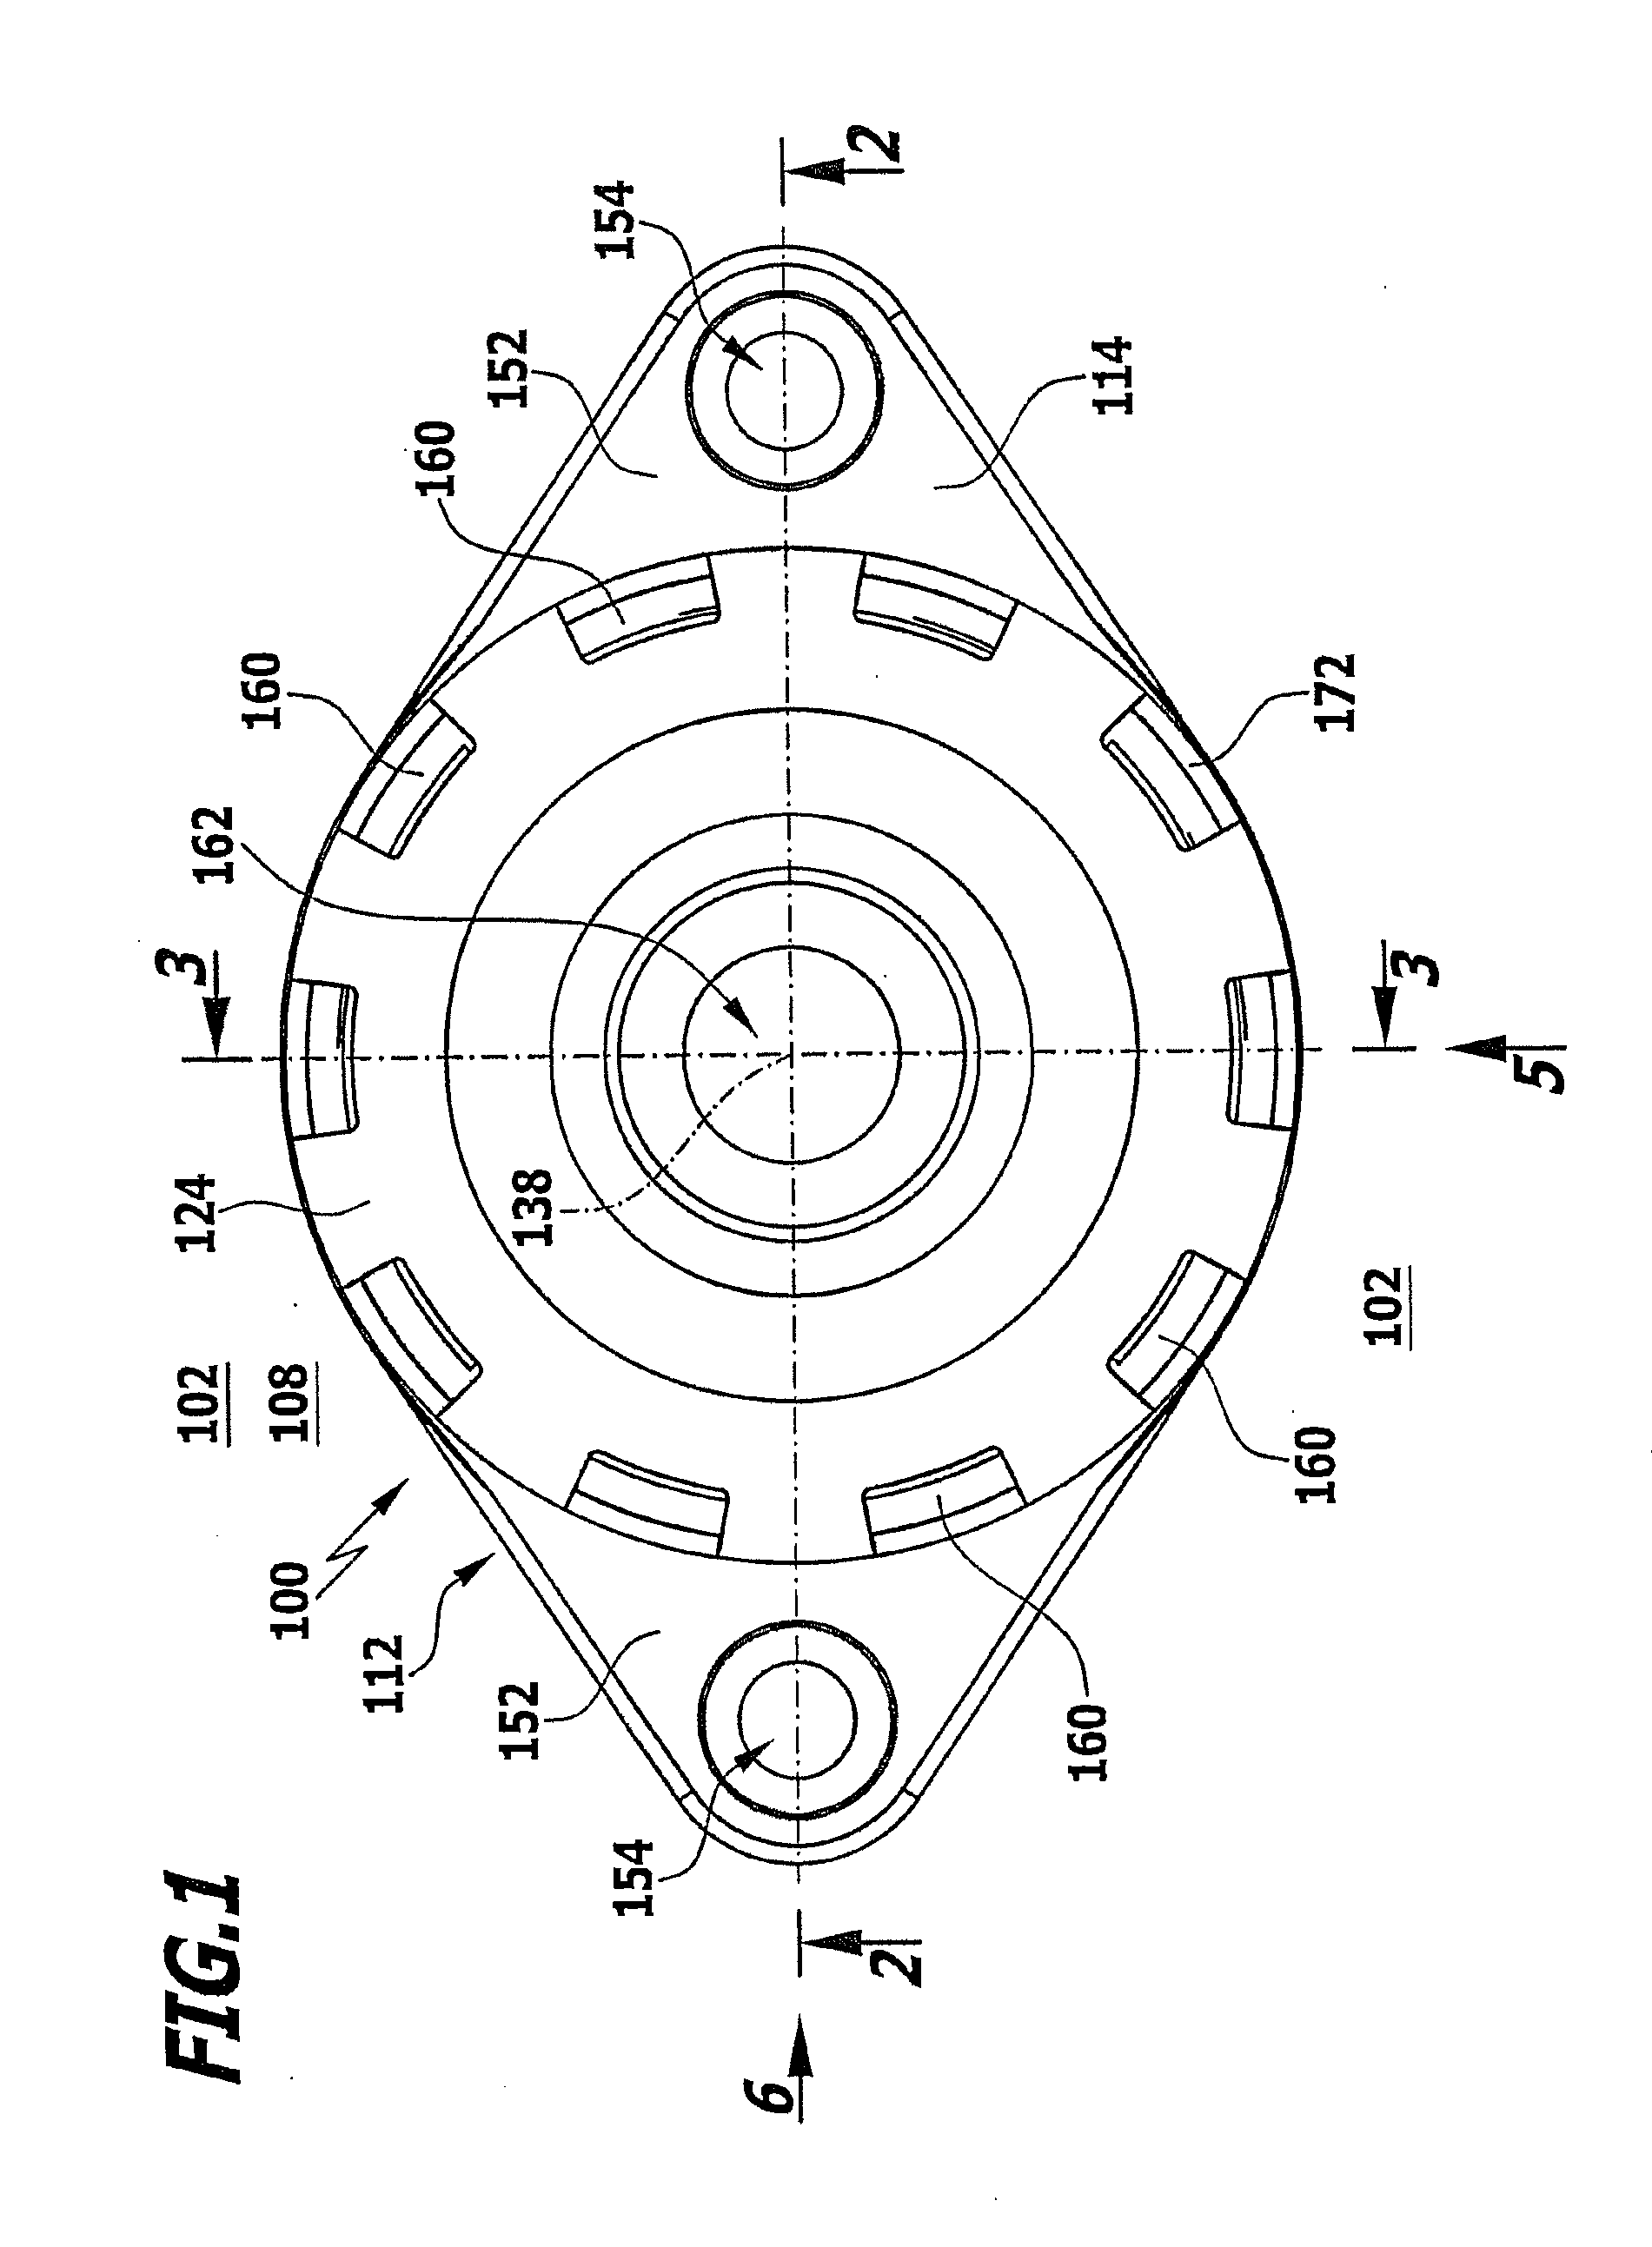 Pressure compensation device for a housing of an electrochemical device